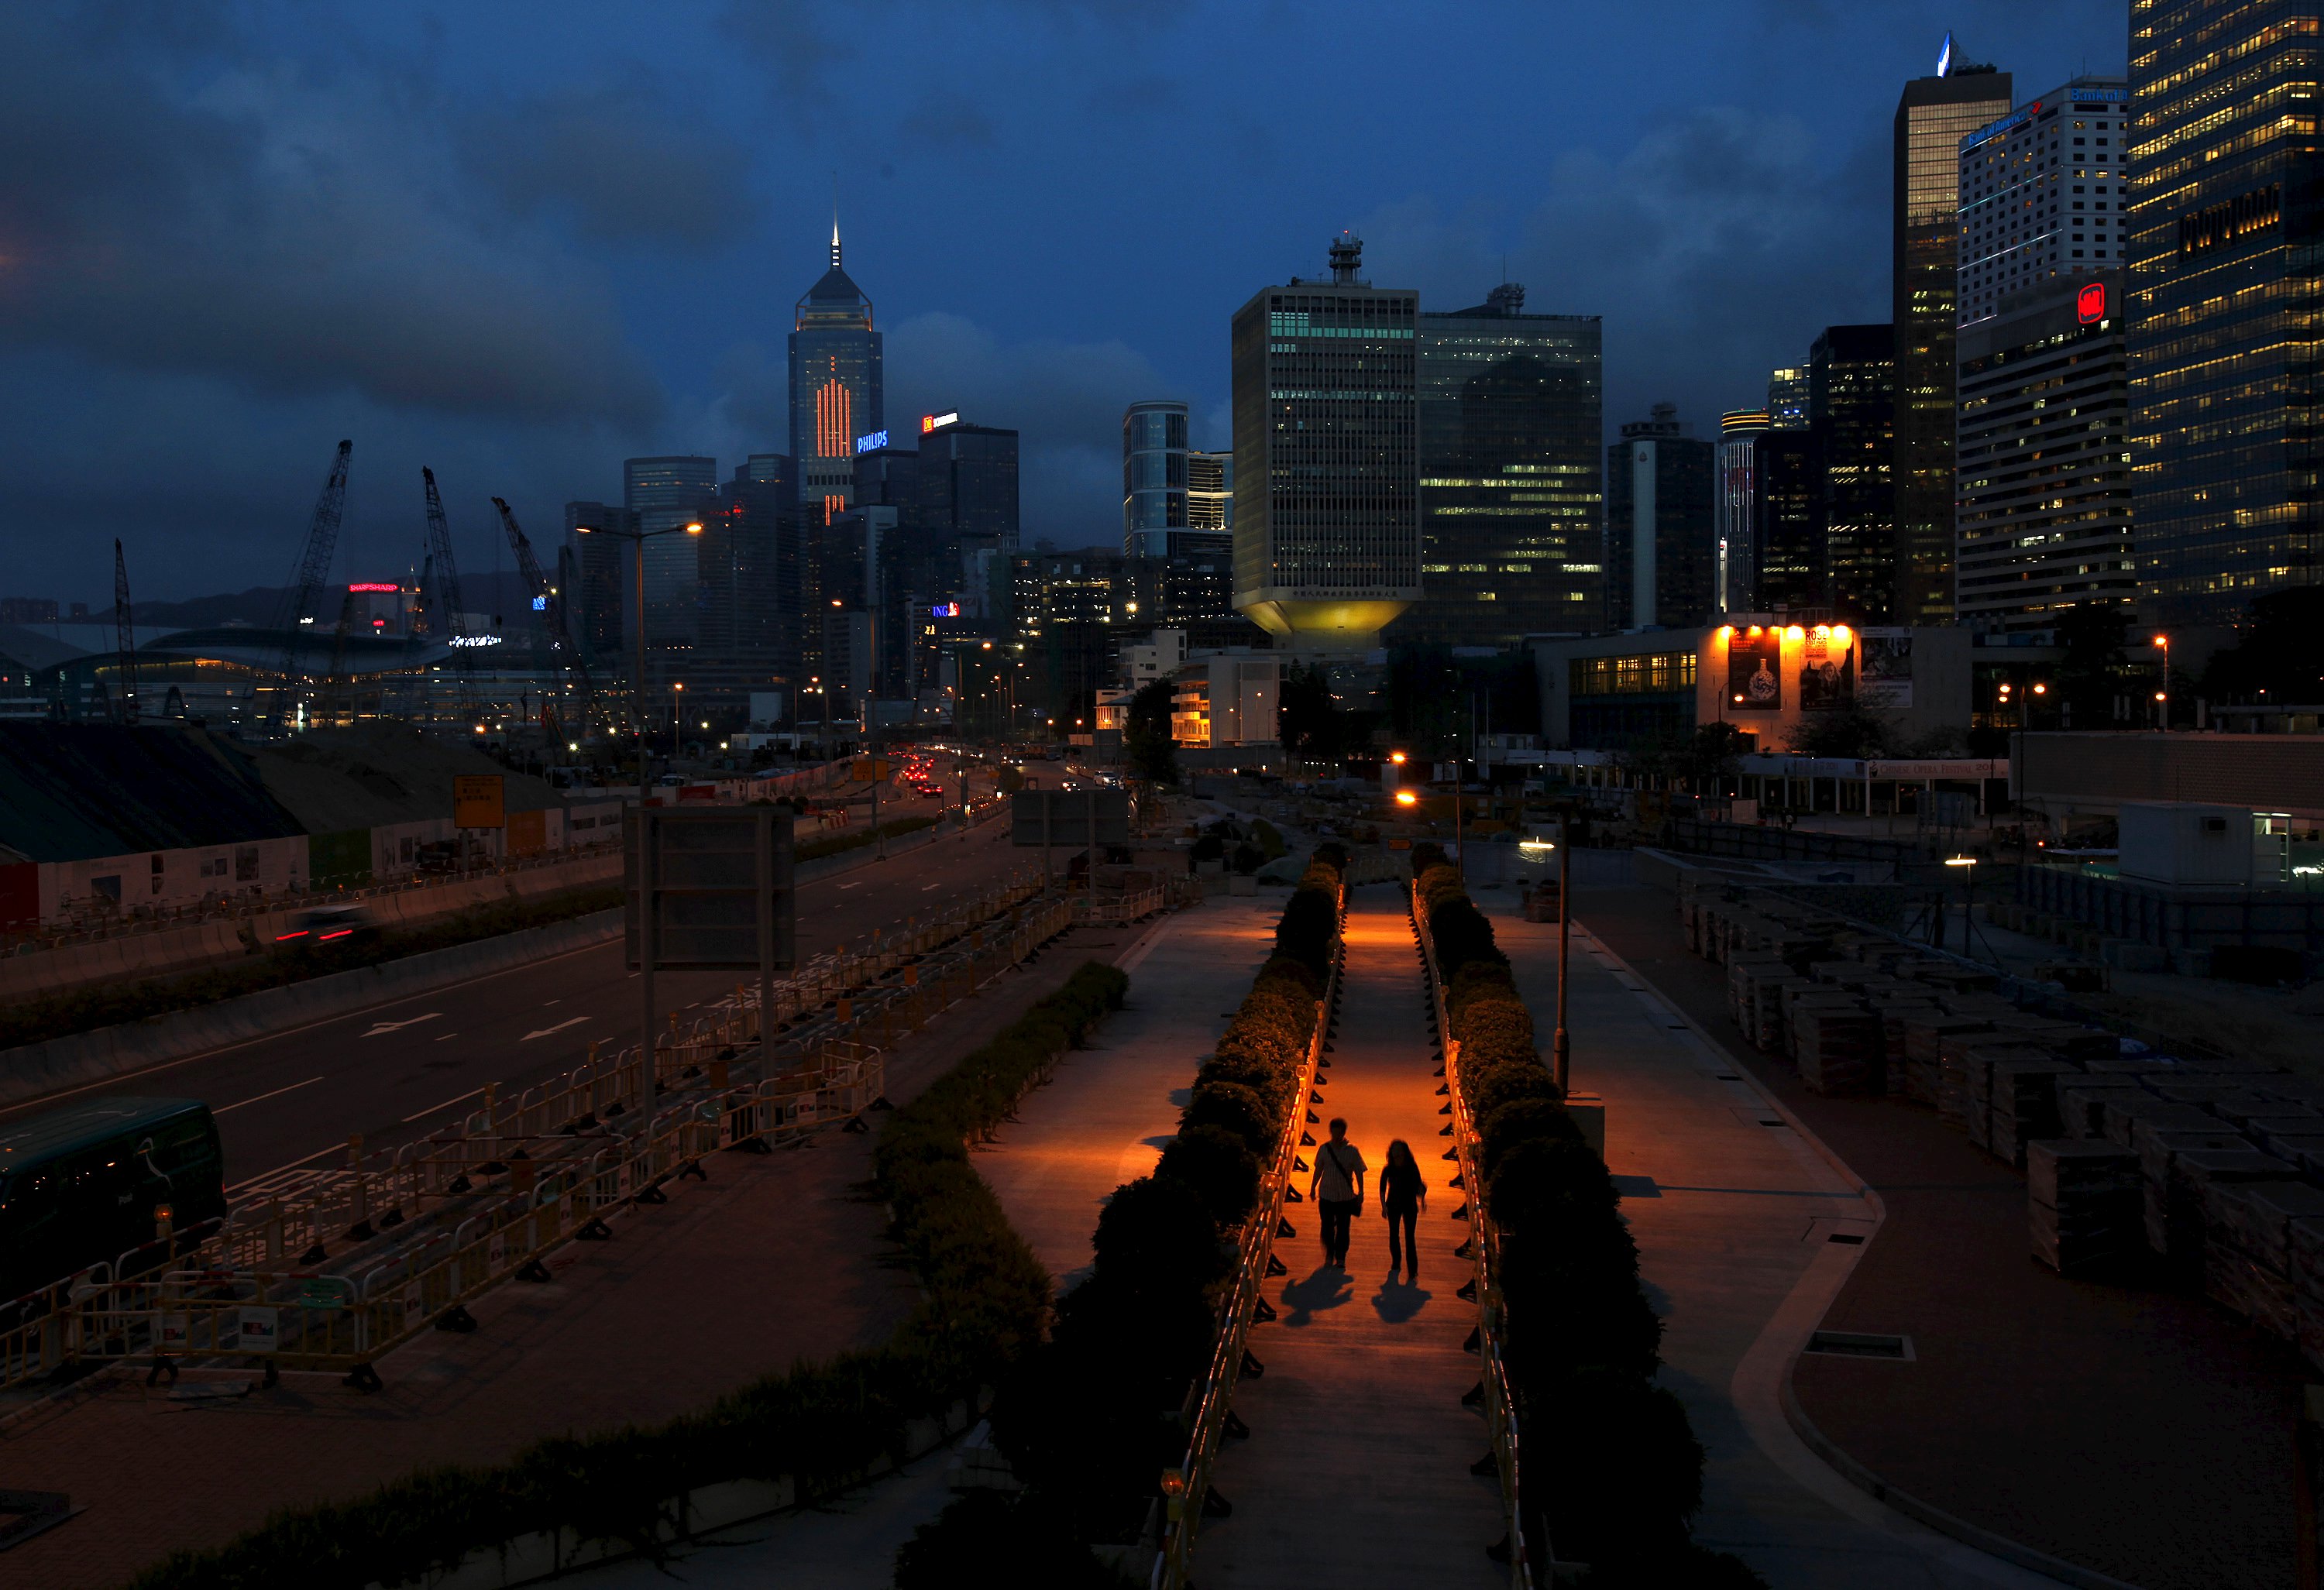 People walk on a pavement at Hong Kong's financial Central district during sunset in this May 11, 2011 file photo. Hong Kong is expected to release PMI data this week. REUTERS/Bobby Yip/Files GLOBAL BUSINESS WEEK AHEAD PACKAGE - SEARCH 'BUSINESS WEEK AHEAD NOVEMBER 30' FOR ALL IMAGES